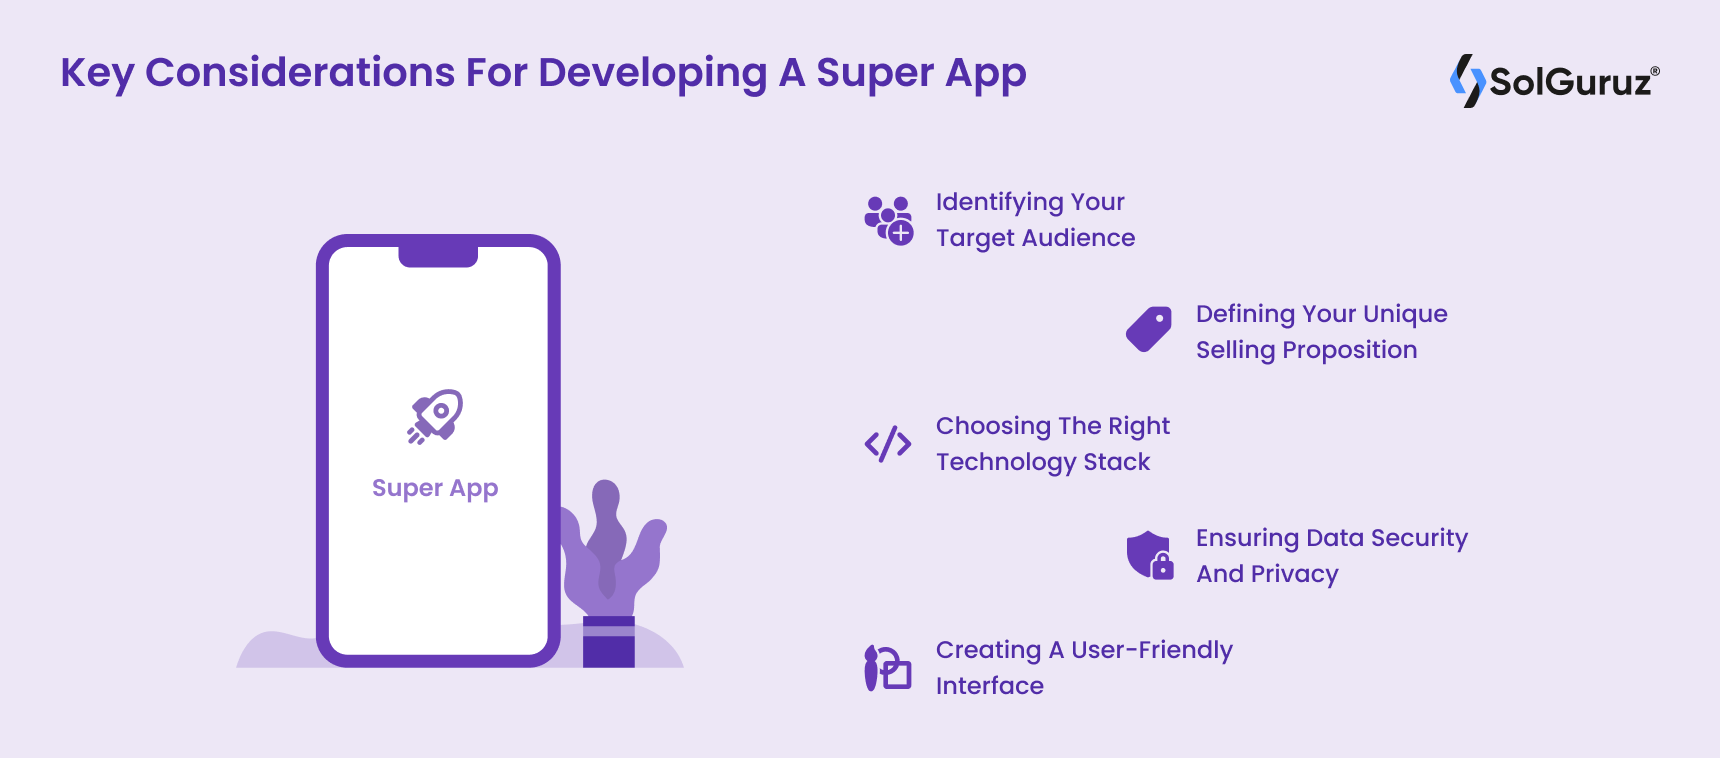 Key Considerations For Developing A Super App